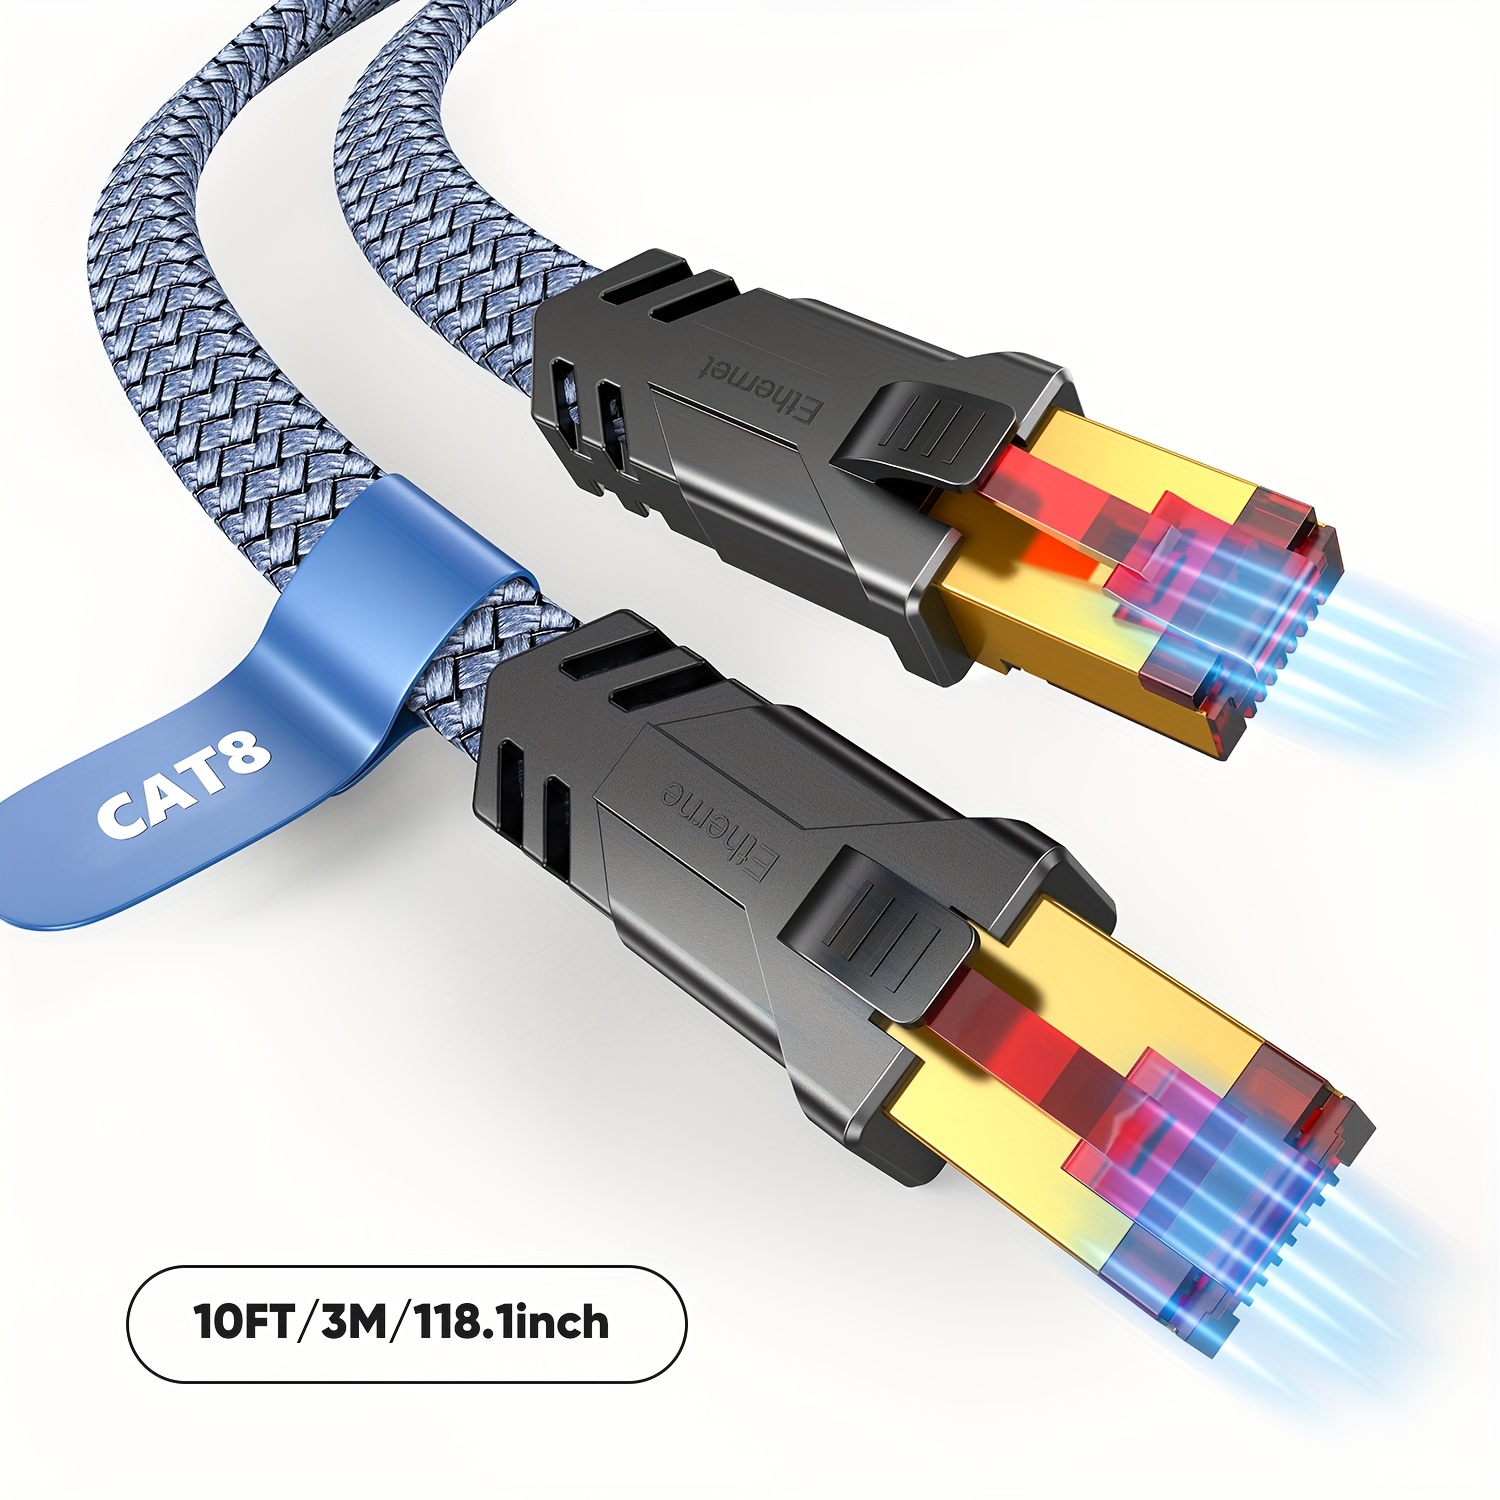 Cat 8 Ethernet Cable Heavy Duty High Speed 40gbps 2000mhz - Temu